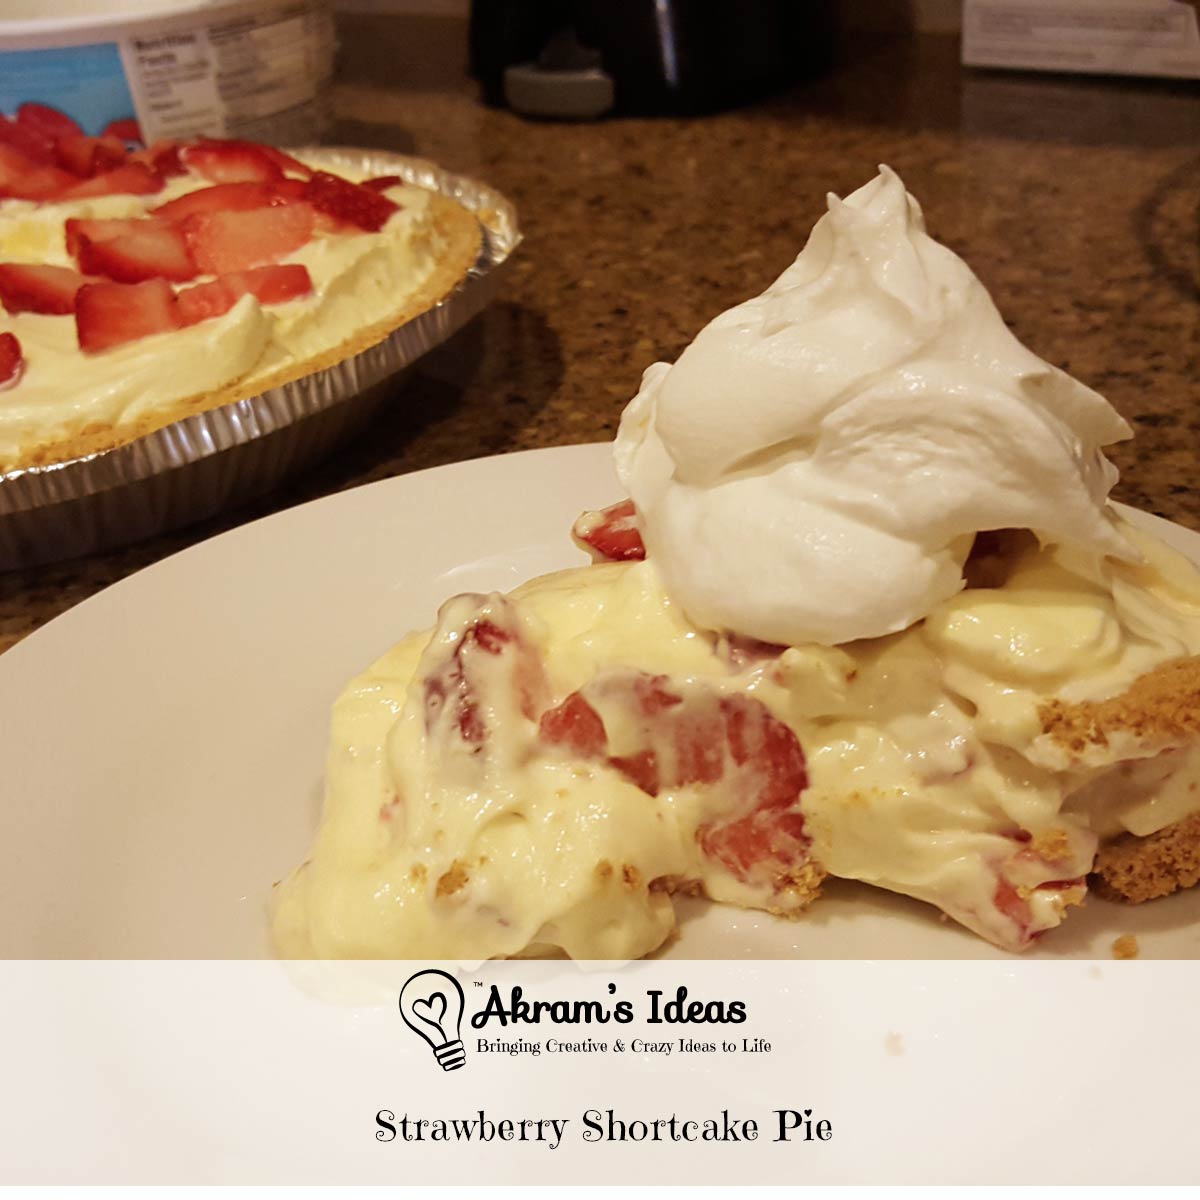 Learn how to make this easy no-bake Strawberry Shortcake Pie, it’s a great twist on a classic springtime treat.